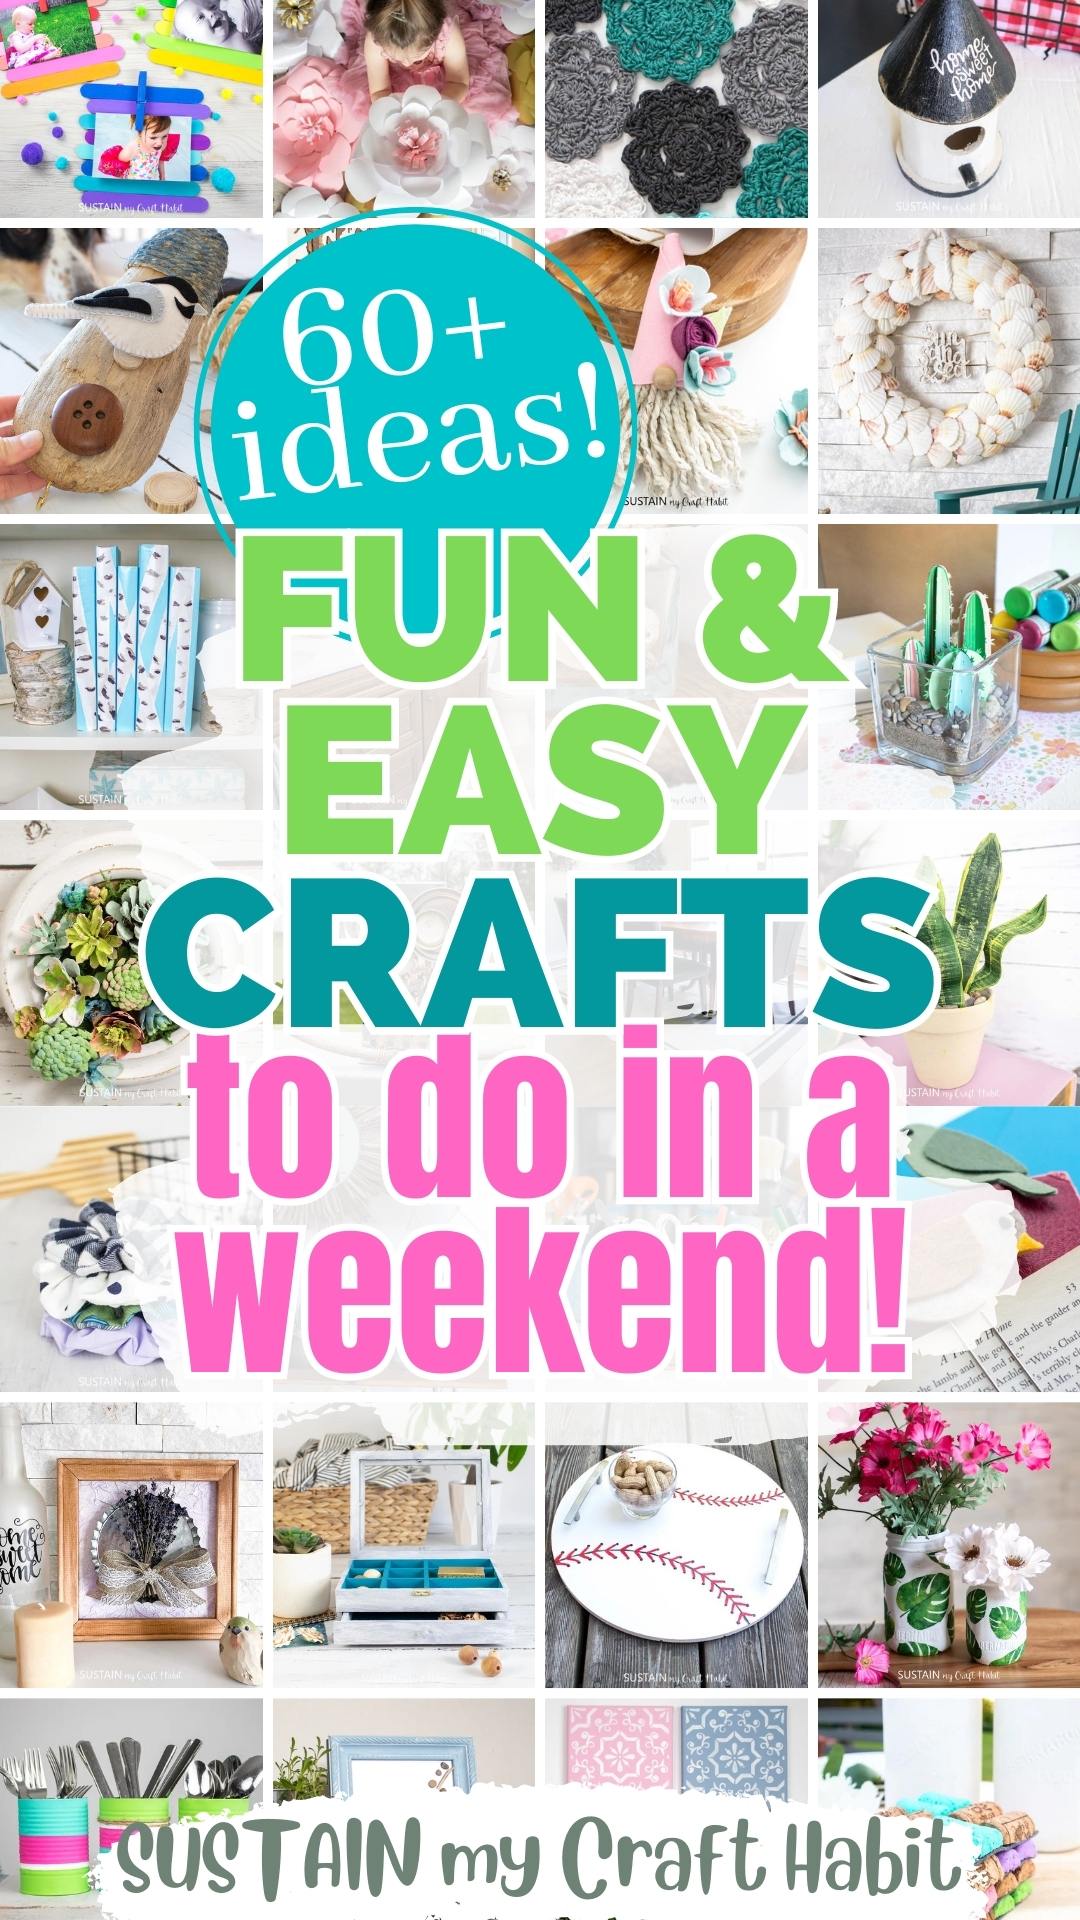 Collage of images of fun and easy craft ideas for adults such as paper craft, upcycling projects and more.